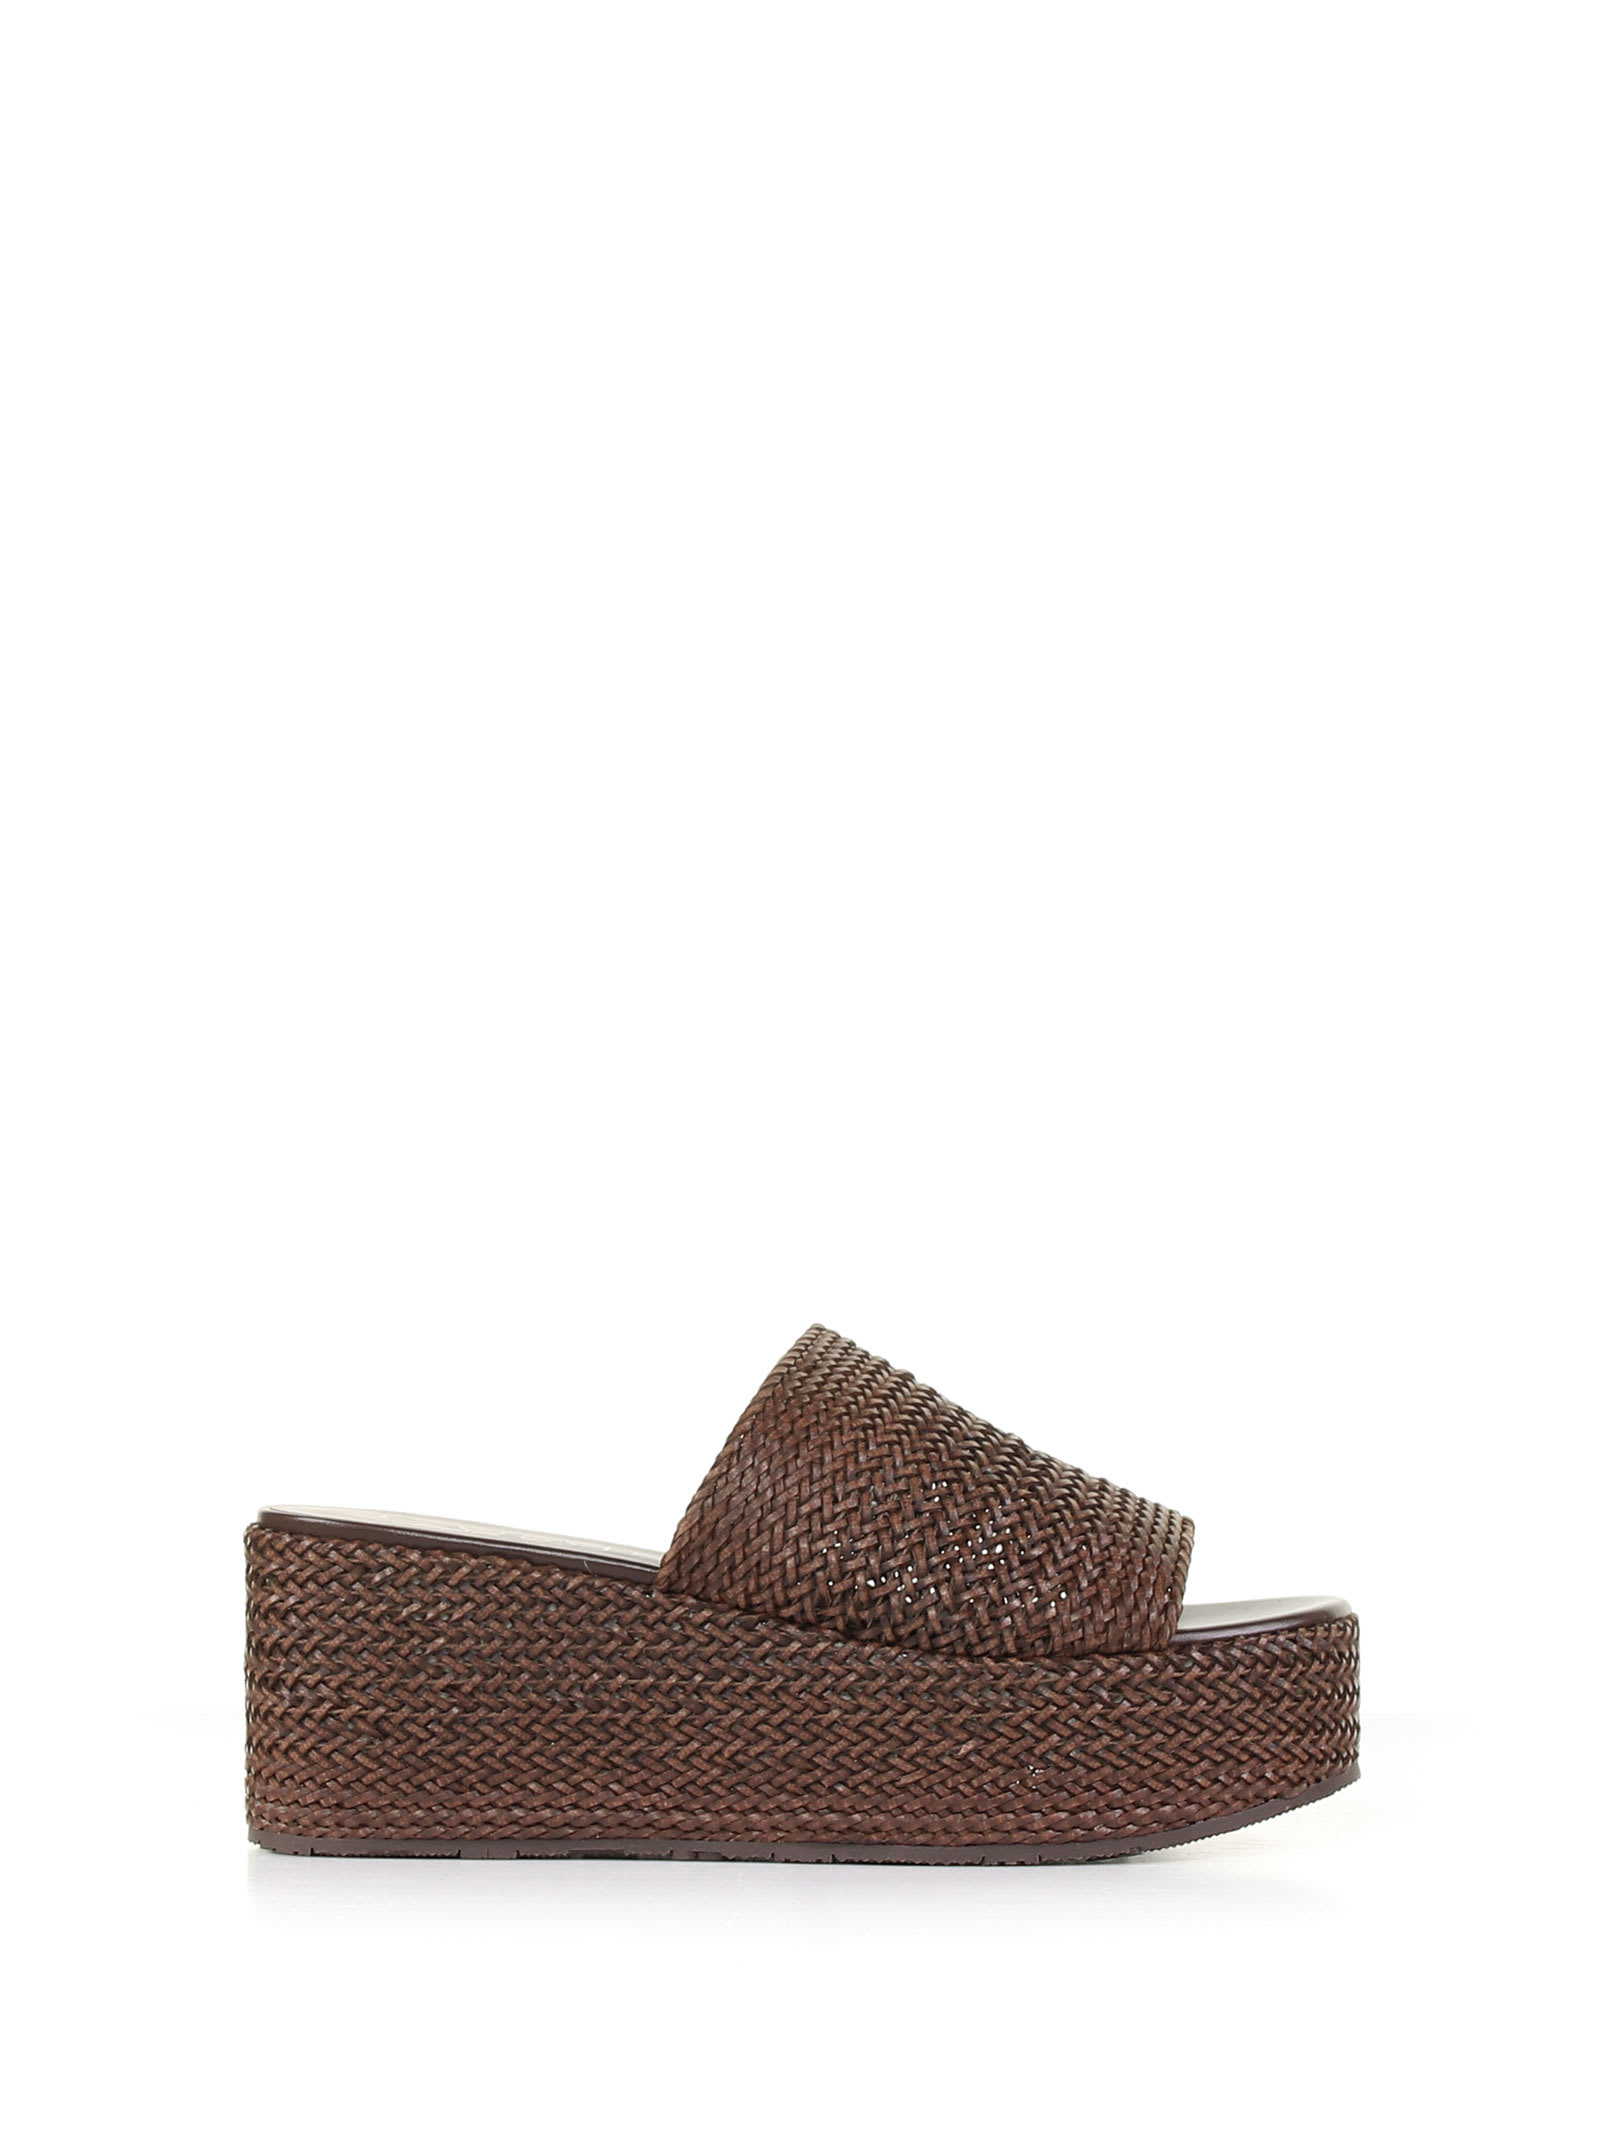 Casadei Twiga Sandals In Woven Leather